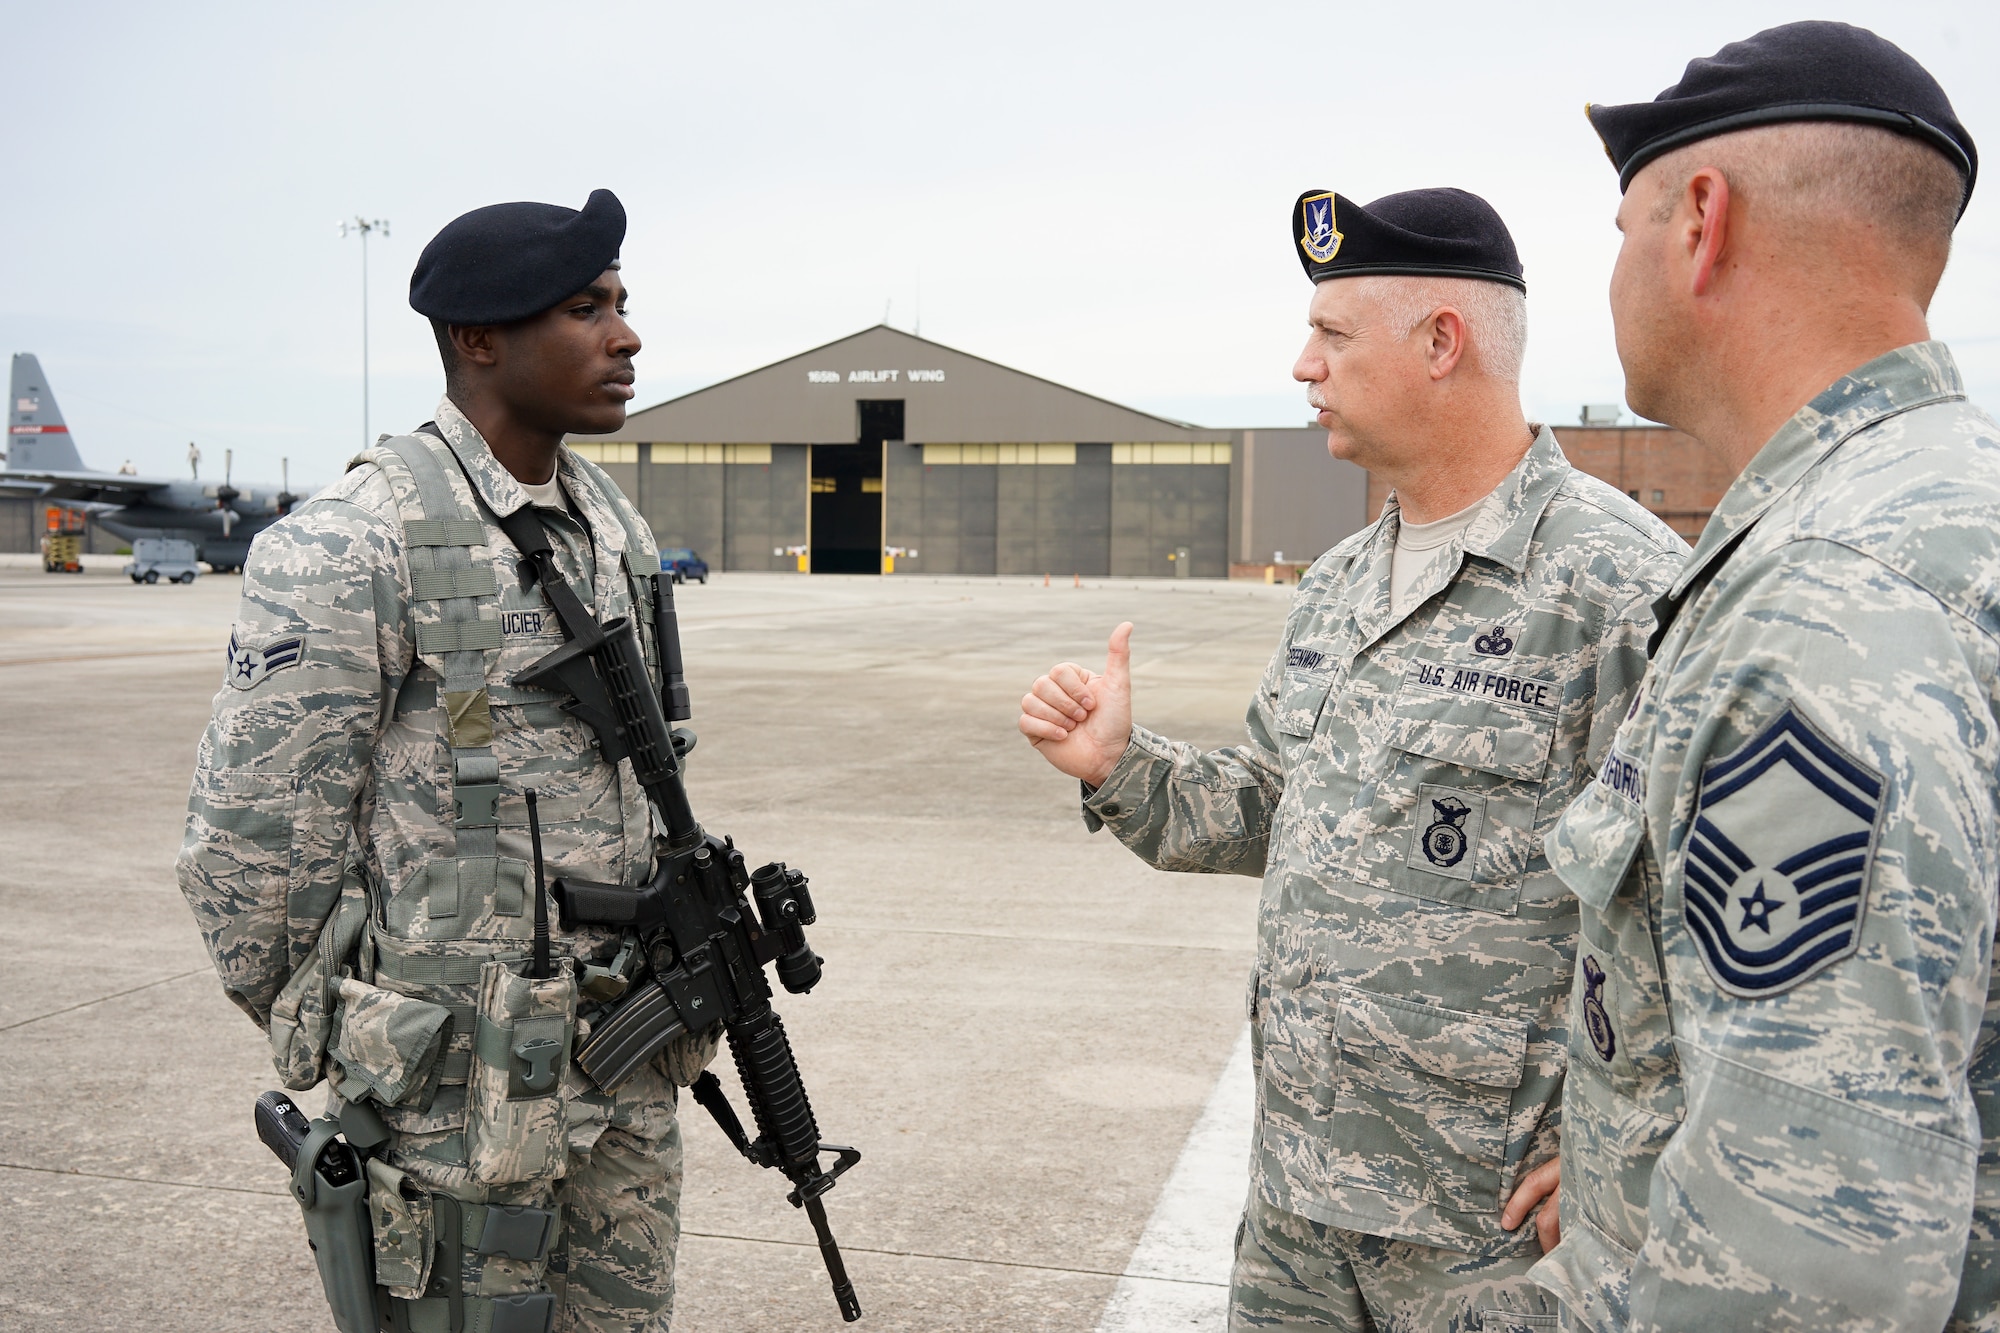 U.S. Air Force Chief Master Sgt. William Greenway, center, 116th Security Forces Squadron (SFS) Manager, questions Airman 1st Class Devajia Saucier, left, while Senior Master Sgt. James Miller, 116th SFS operations superintendent looks on, during a post briefing on the flightline at Joint Base Savannah, Ga., June 23, 2015. The JSTARS cops from the Georgia Air National Guard’s 116th Air Control Wing completed 15 days of law enforcement and flightline security training during their annual tour at Joint Base Savannah. During the training, the security forces Airmen responded to multiple simulated security threats each day and played the role of both cops and aggressors under the watchful eye of evaluators from the unit. (U.S. Air National Guard photo by Senior Master Sgt. Roger Parsons/Released)